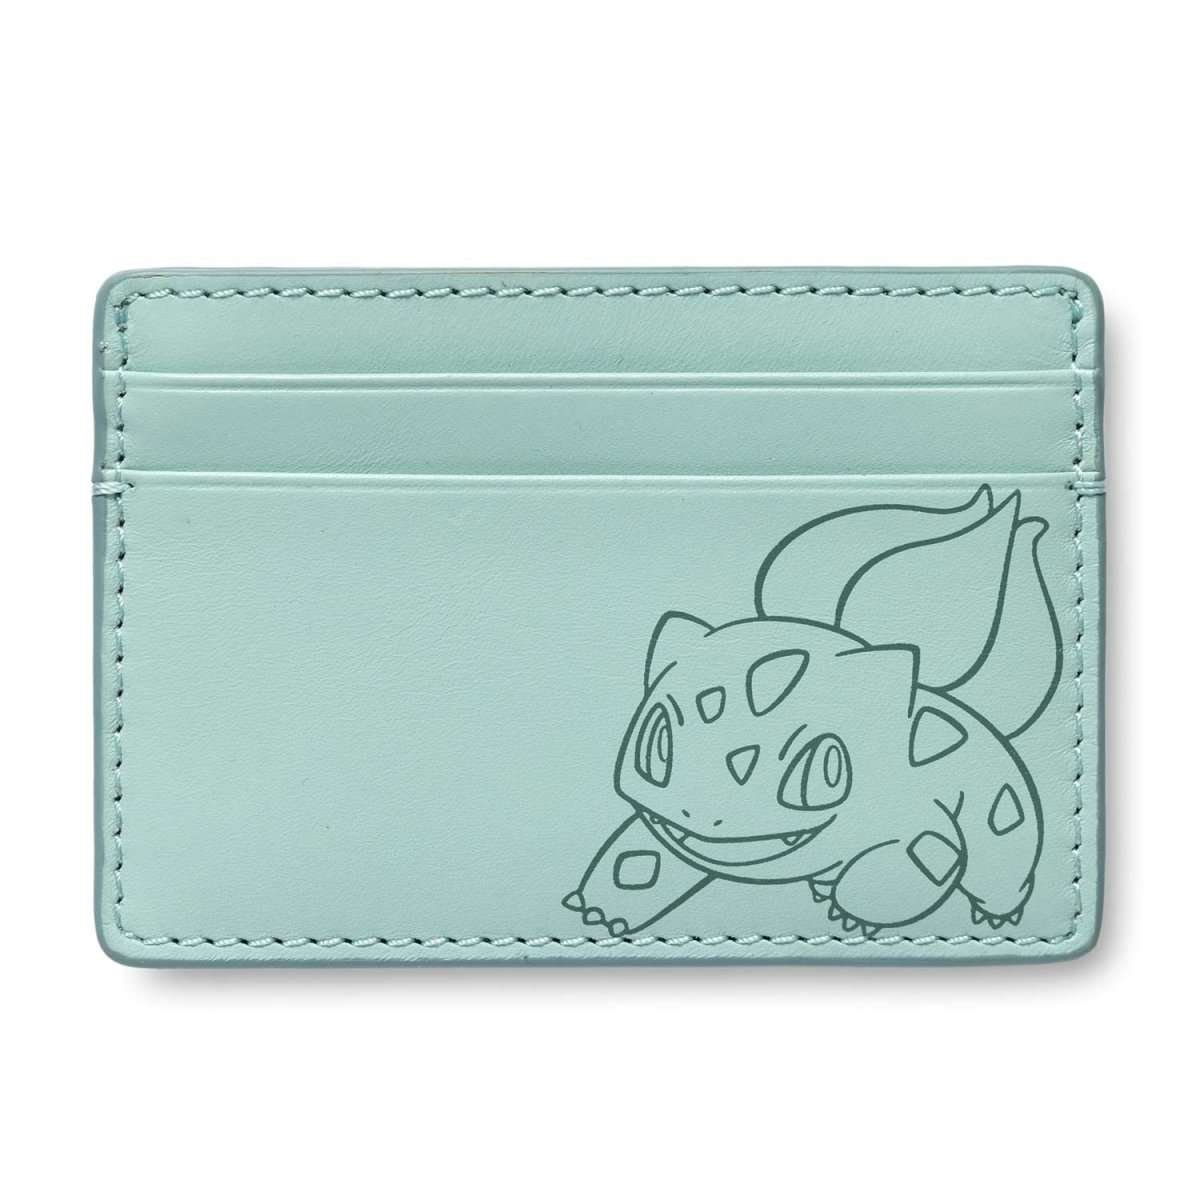 Pokémon Card Notebook/pocketbook. Ideal for Gift Stocking 